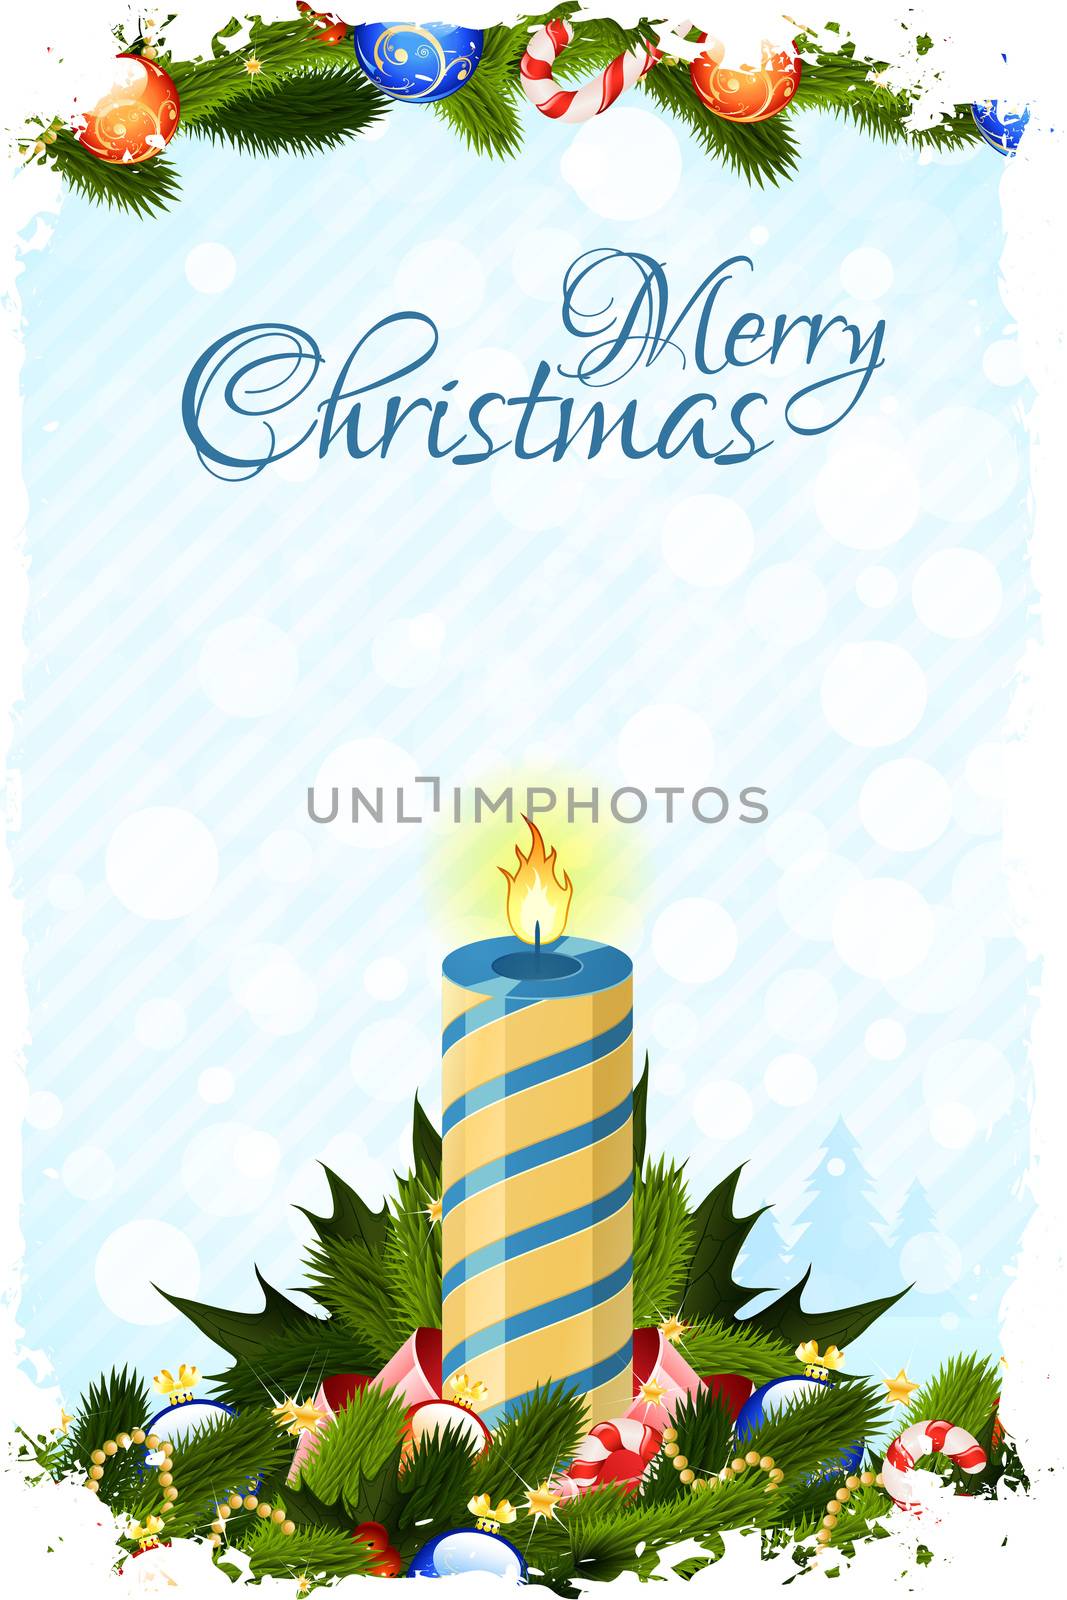 Grungy Christmas Card with Candle Fir Trees and Decoration